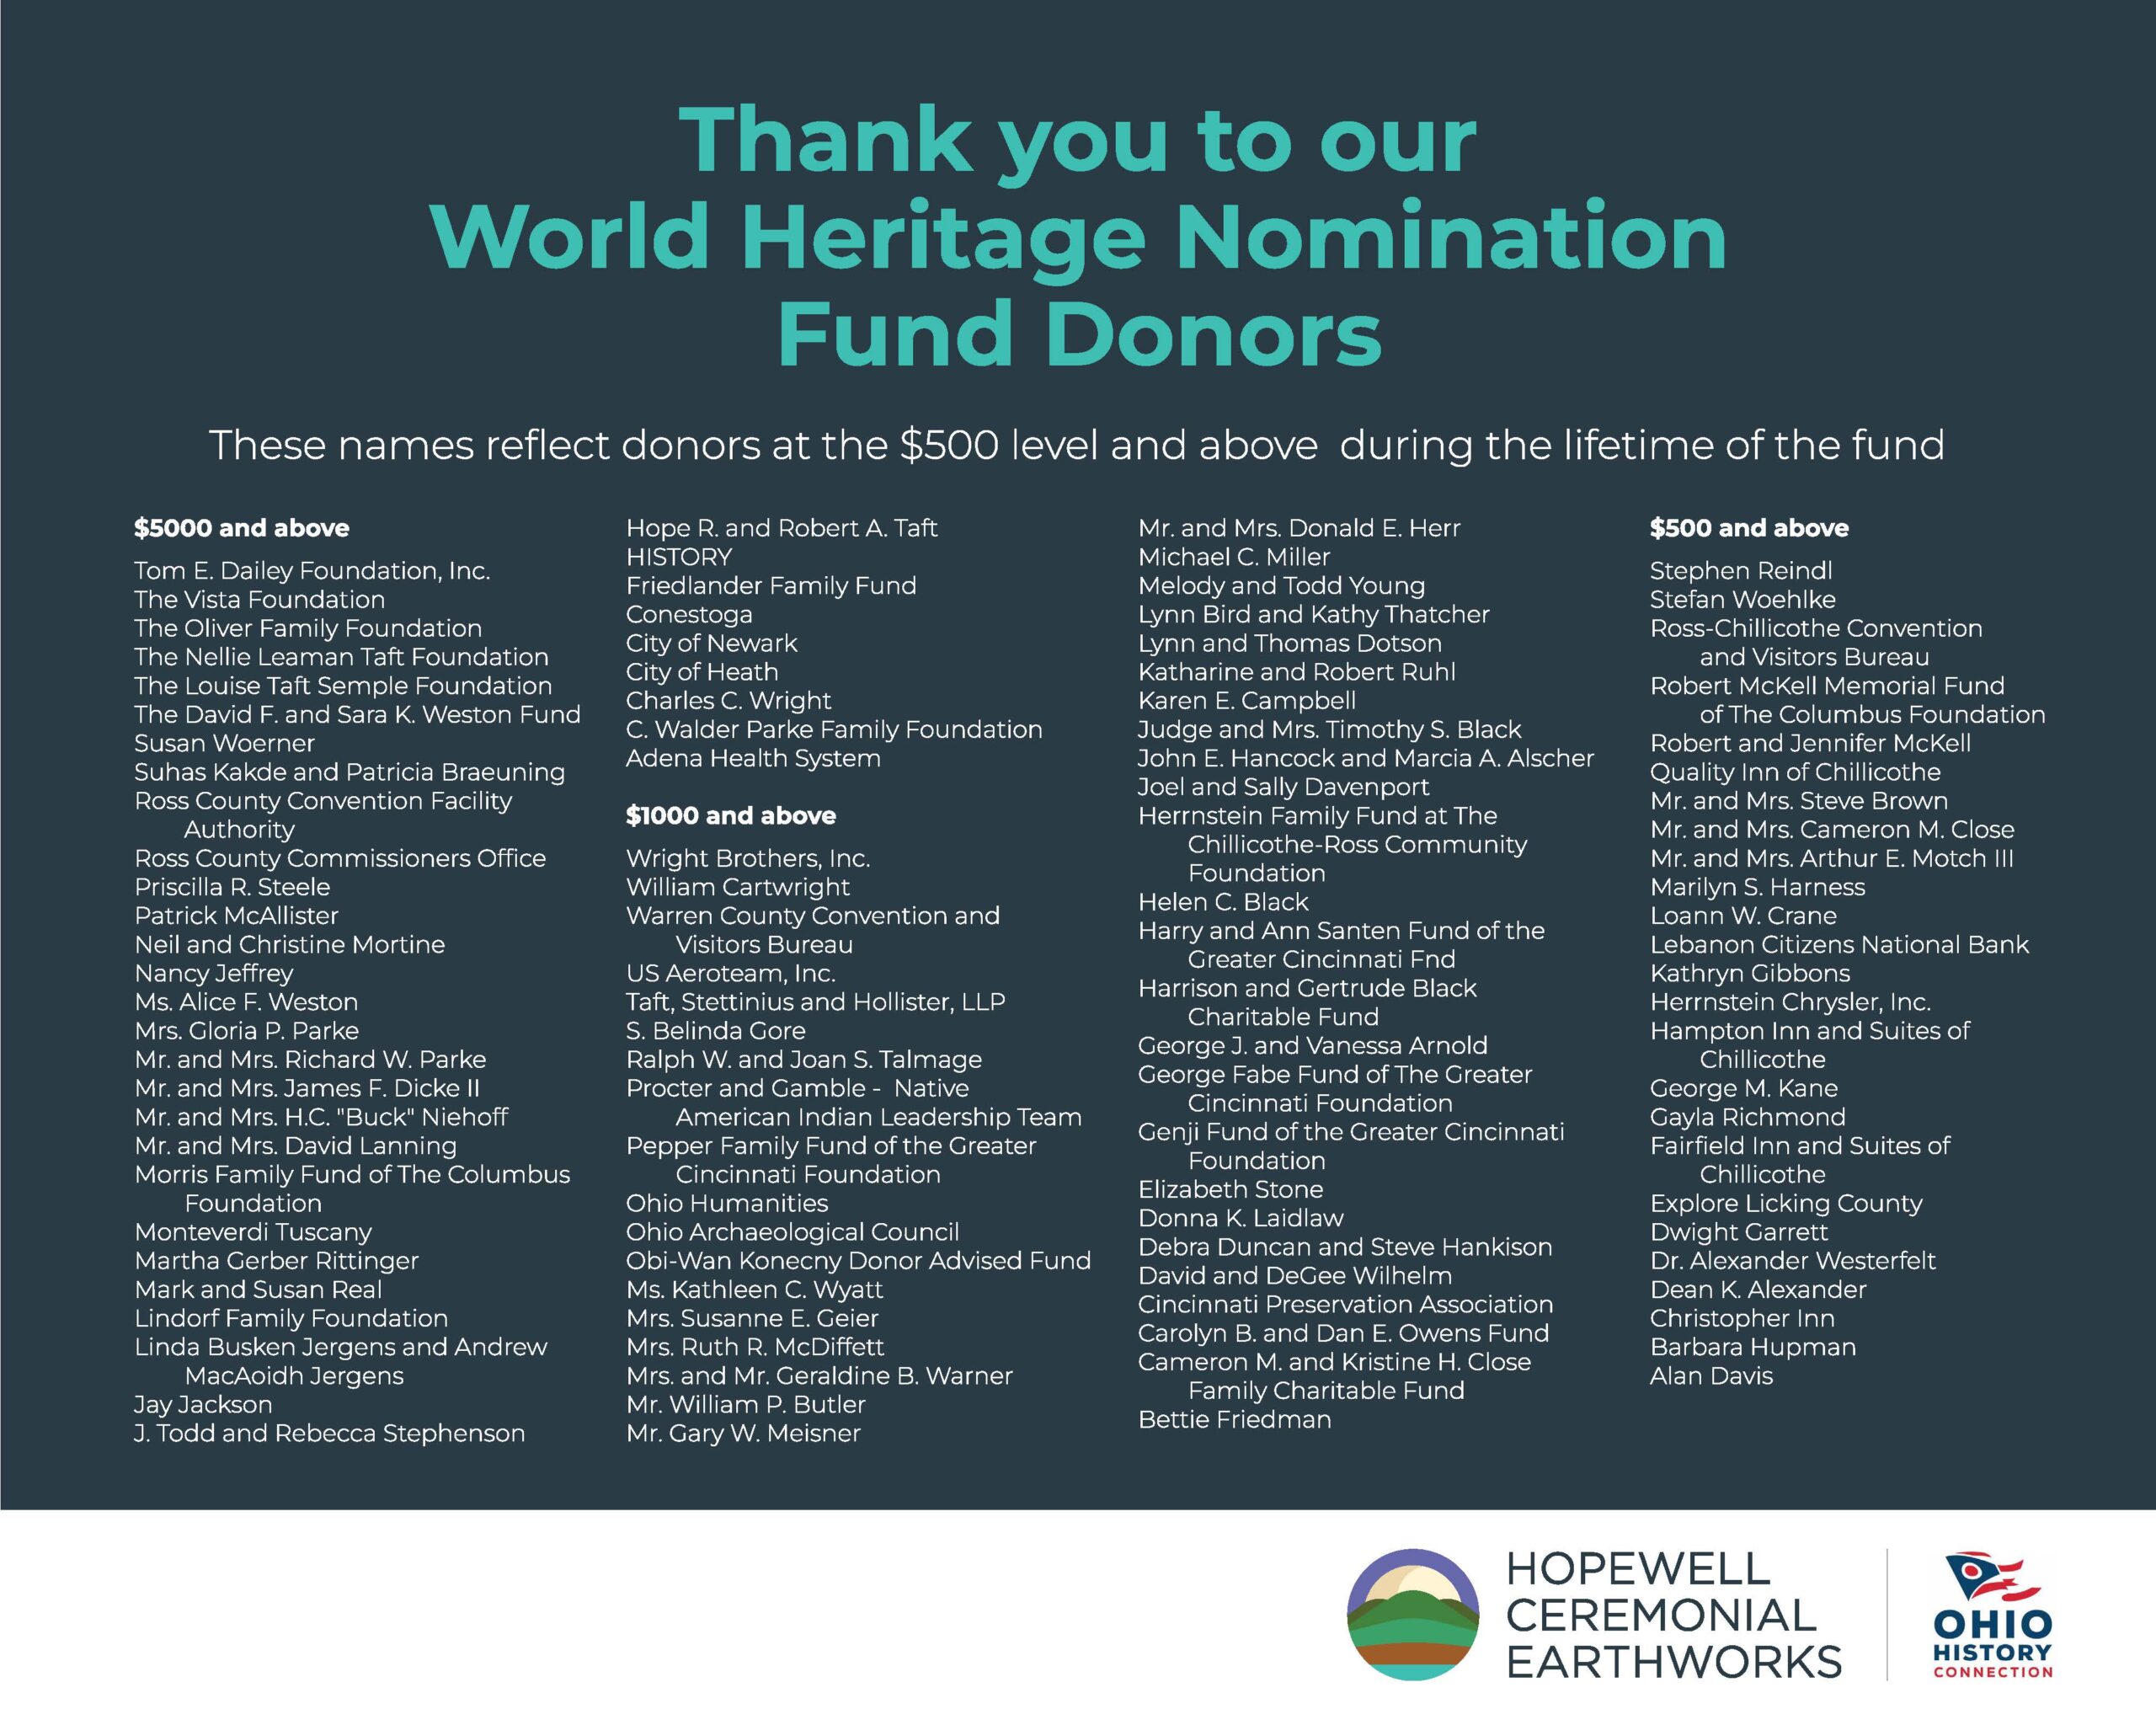 Thank you to our World Heritage Nomination Fund Donors. The names included reflect donors at a $500 level and above during the lifetime of the fund.